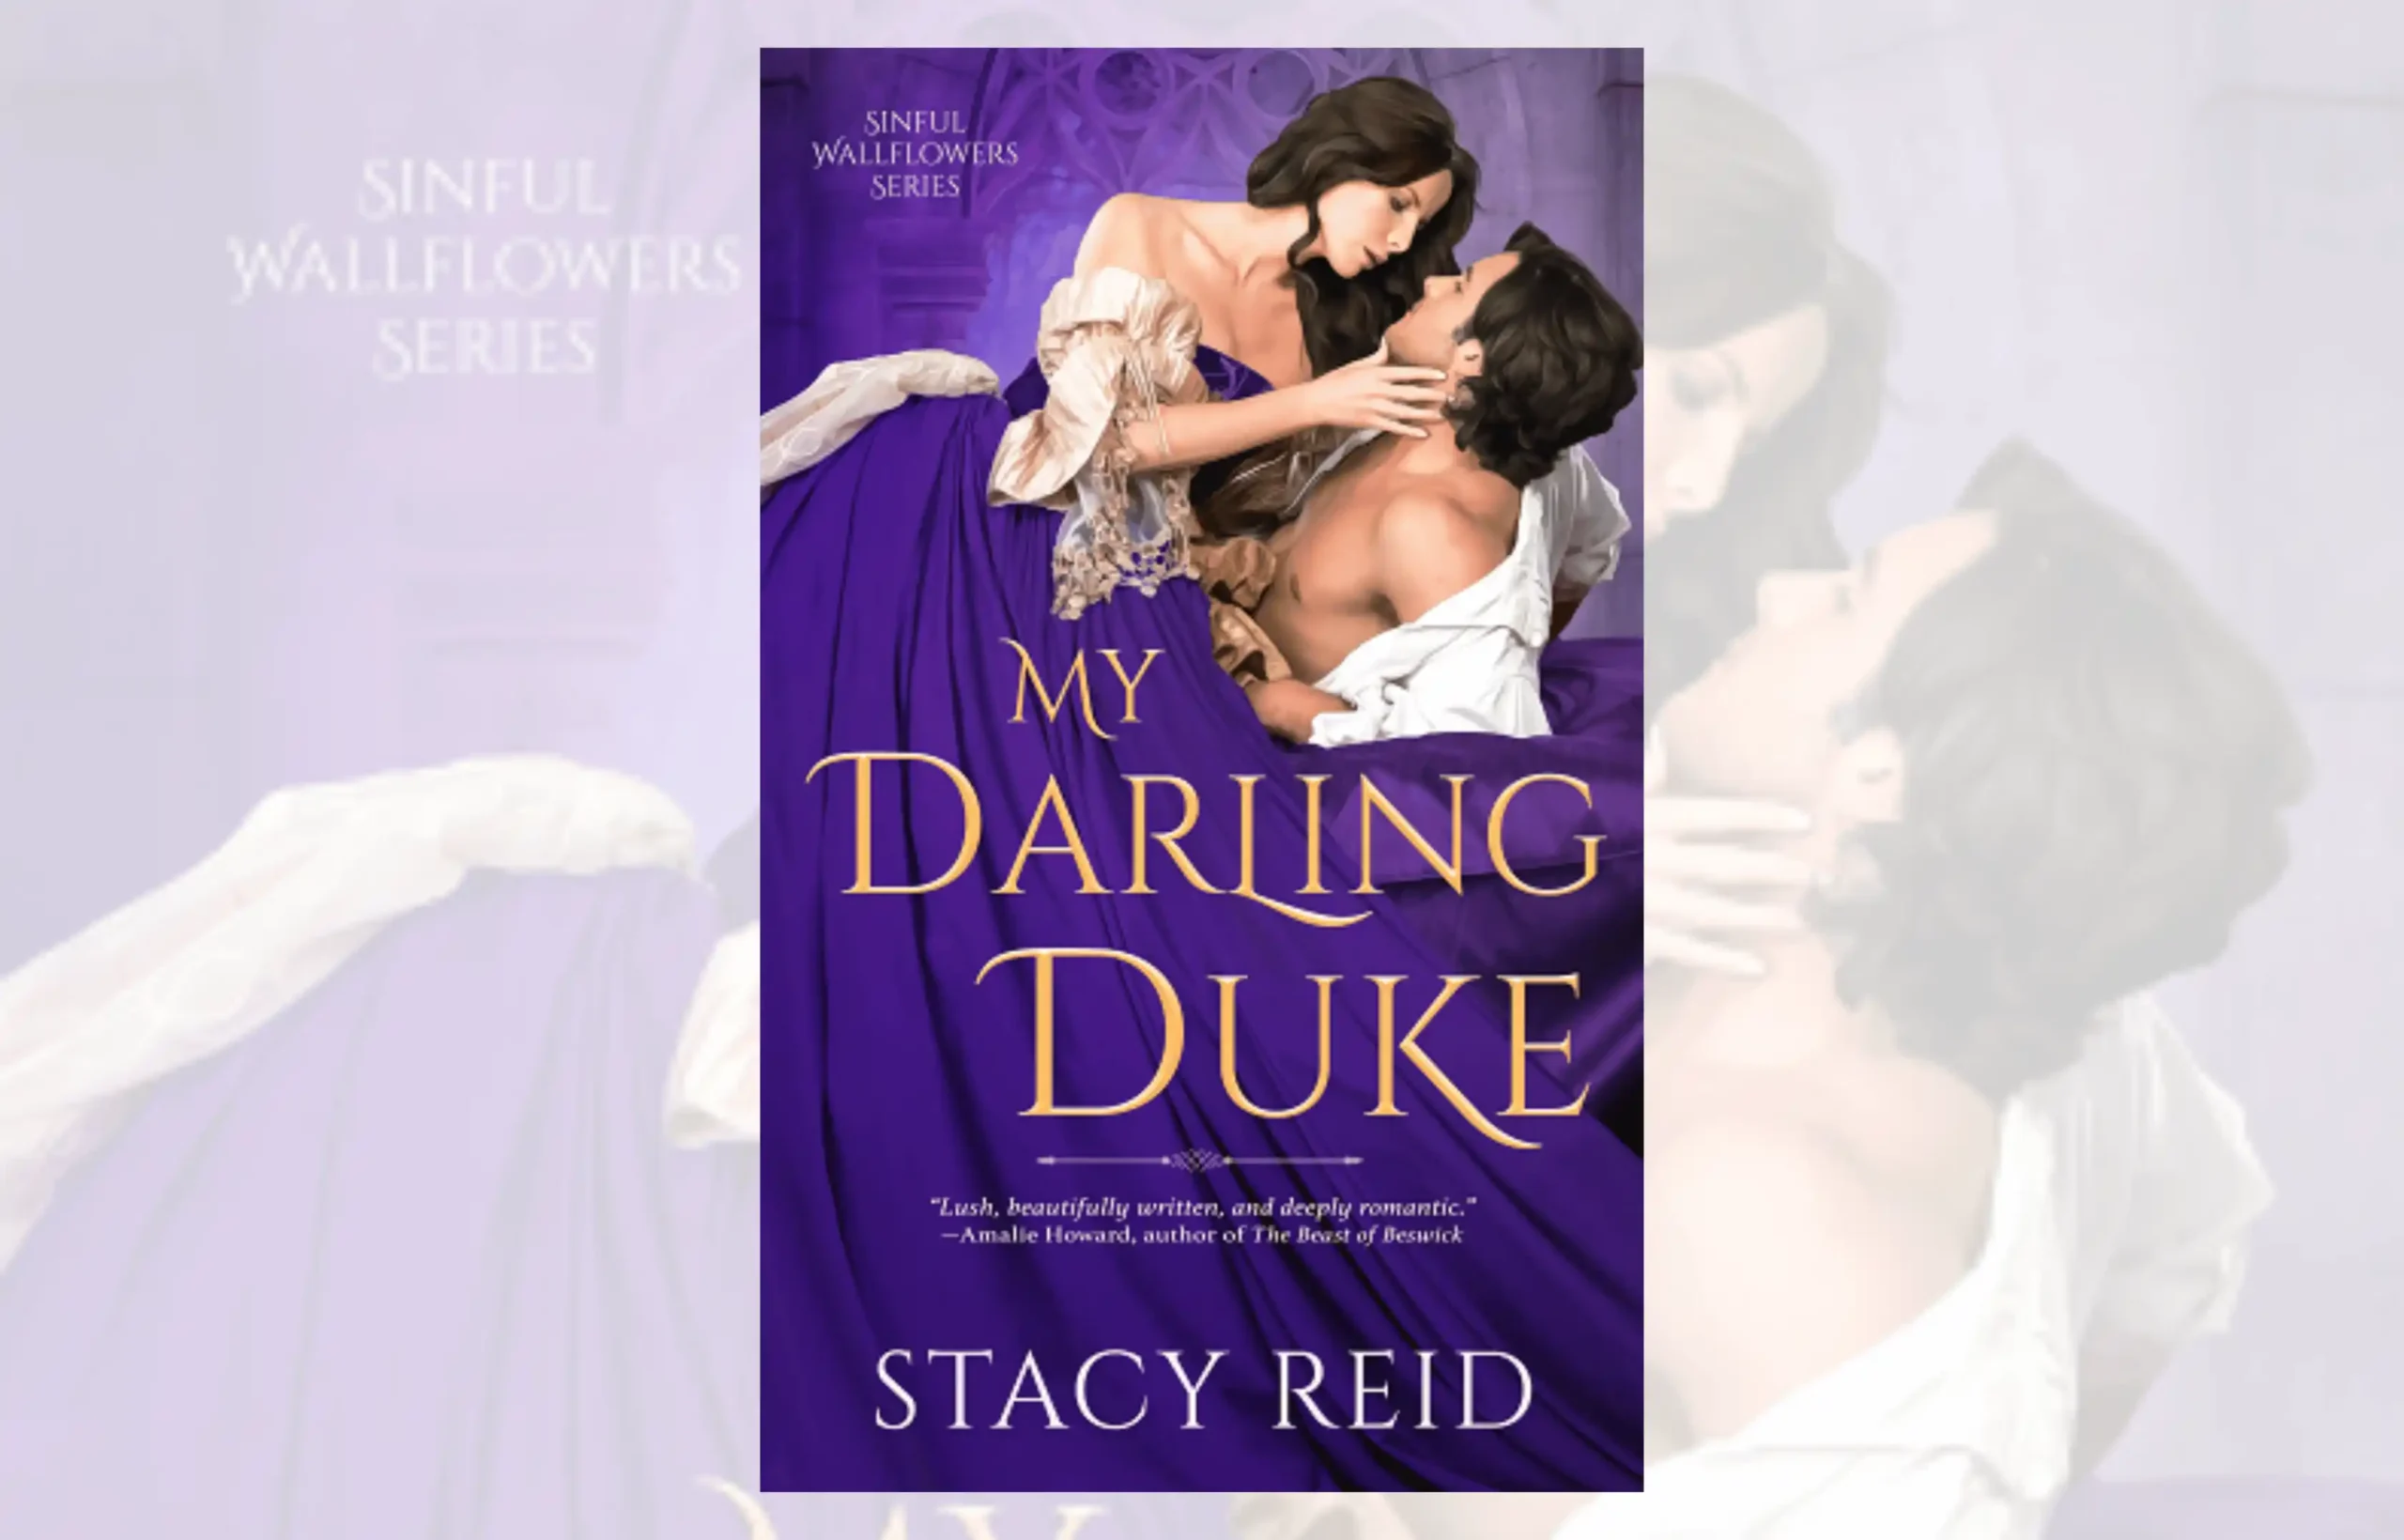 My darling Duke by staci reif scaled